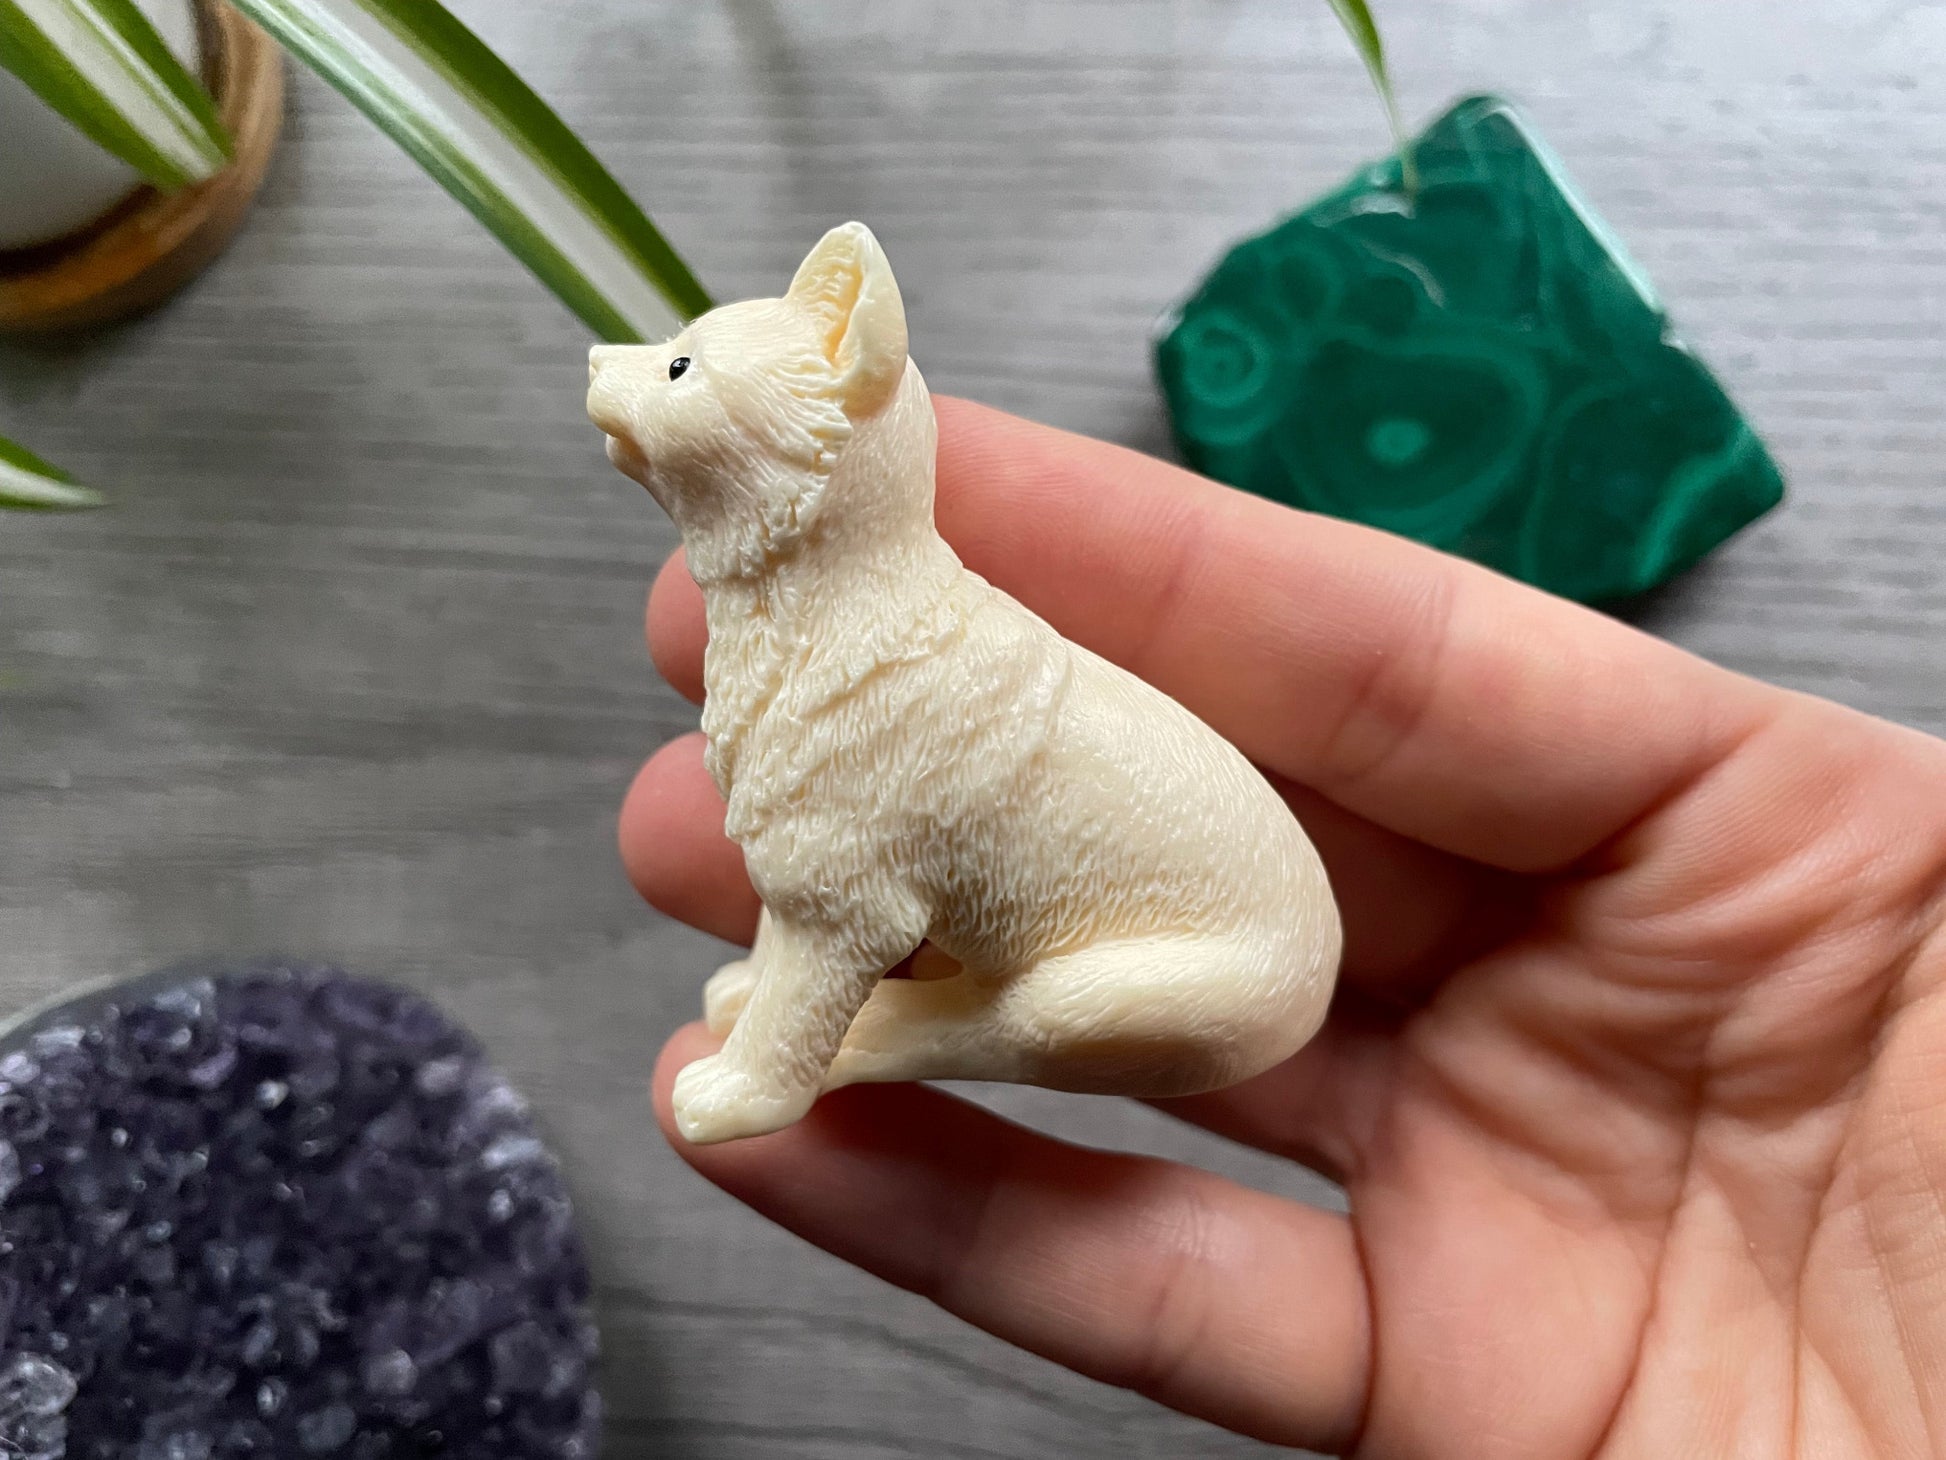 Pictured is a dog carved out of tagua nut.